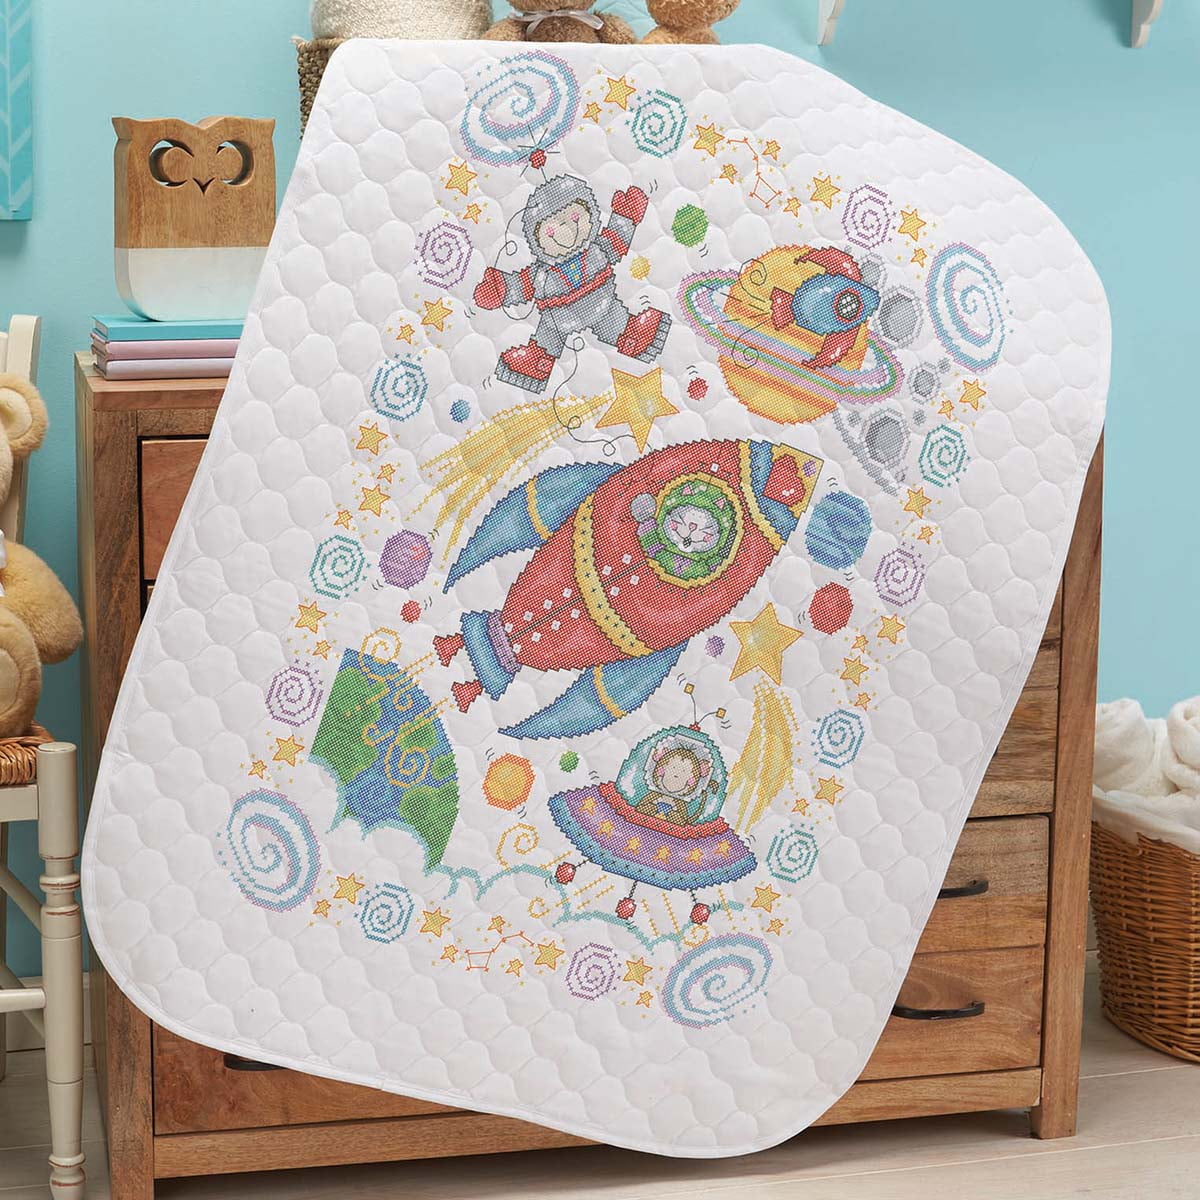  Design Works Crafts Janlynn Stamped for Cross Stitch Baby Quilt  Kit, in The Jungle